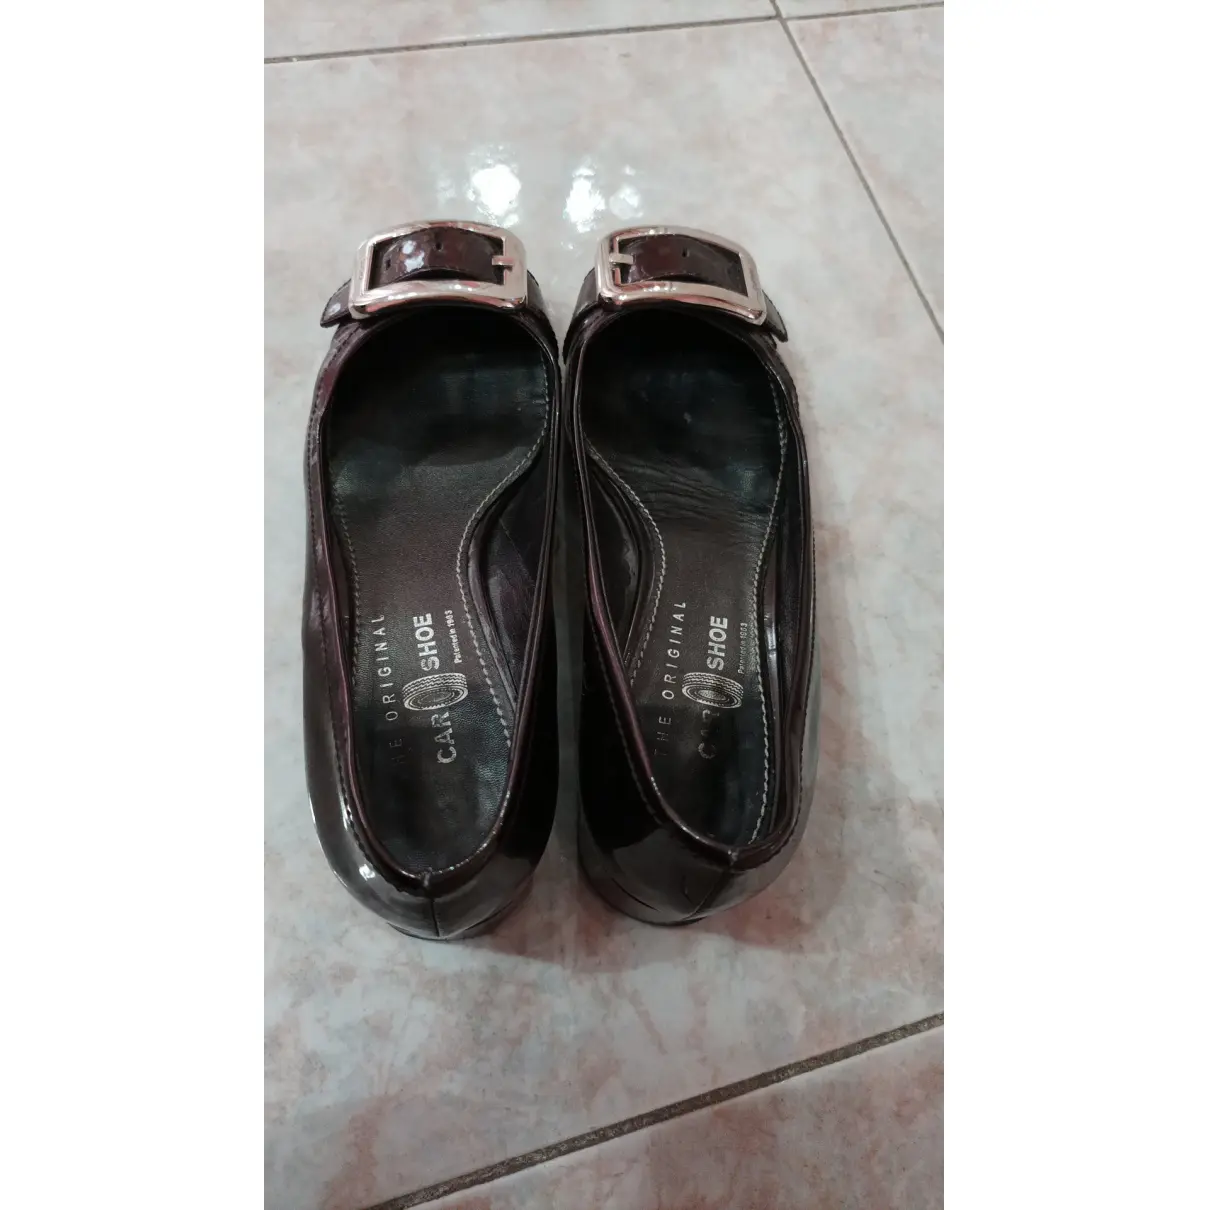 Patent leather ballet flats Carshoe